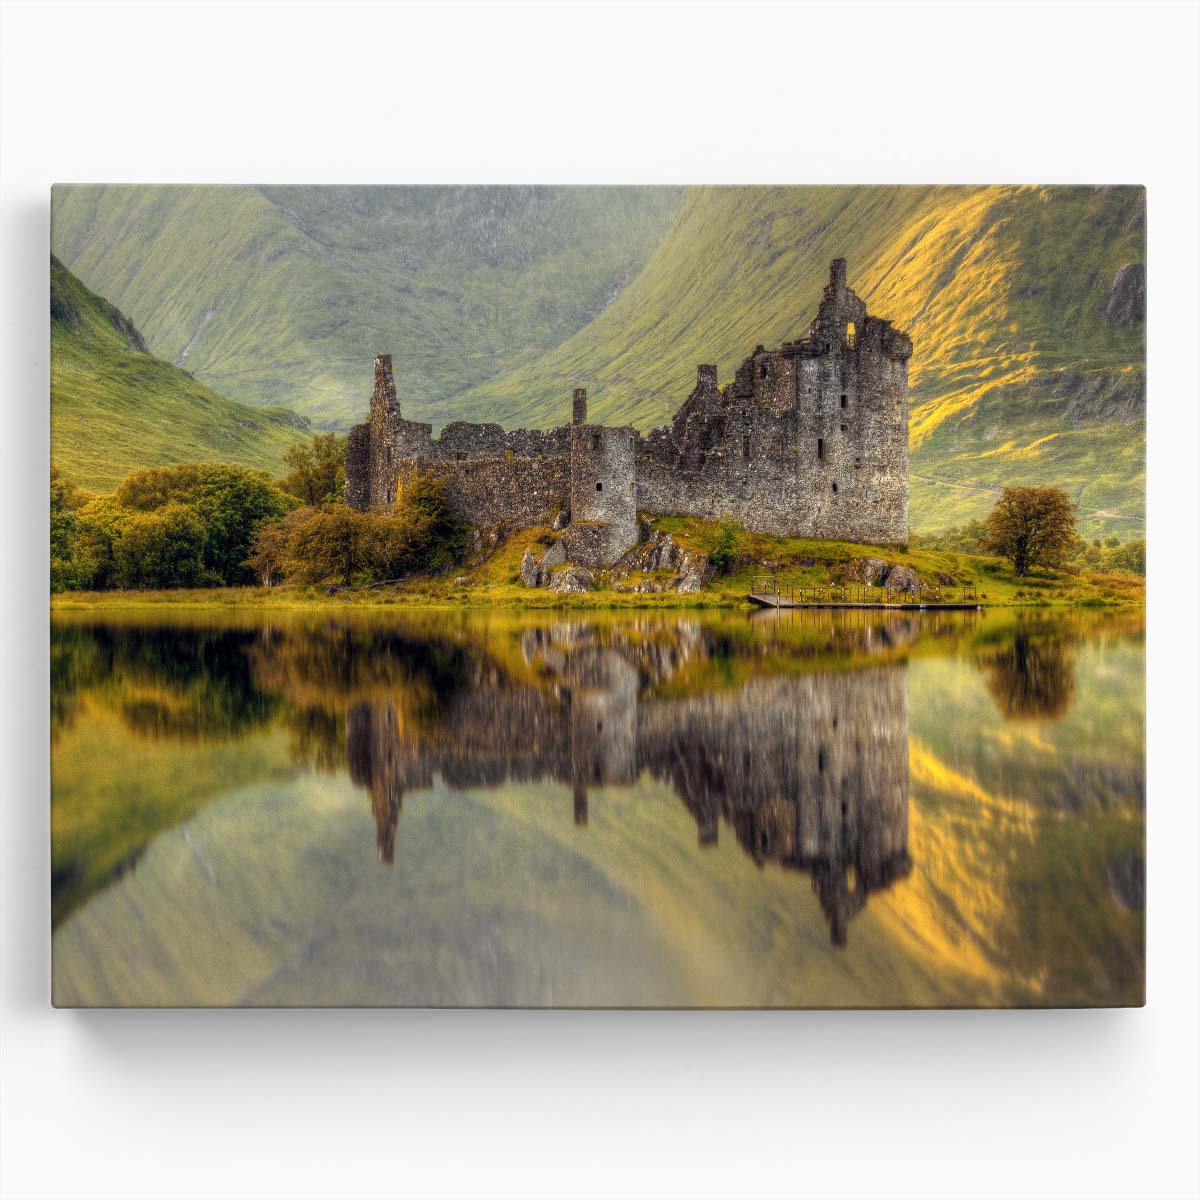 Kilchurn Castle Ruins Panoramic Wall Art, Scotland by Luxuriance Designs. Made in USA.